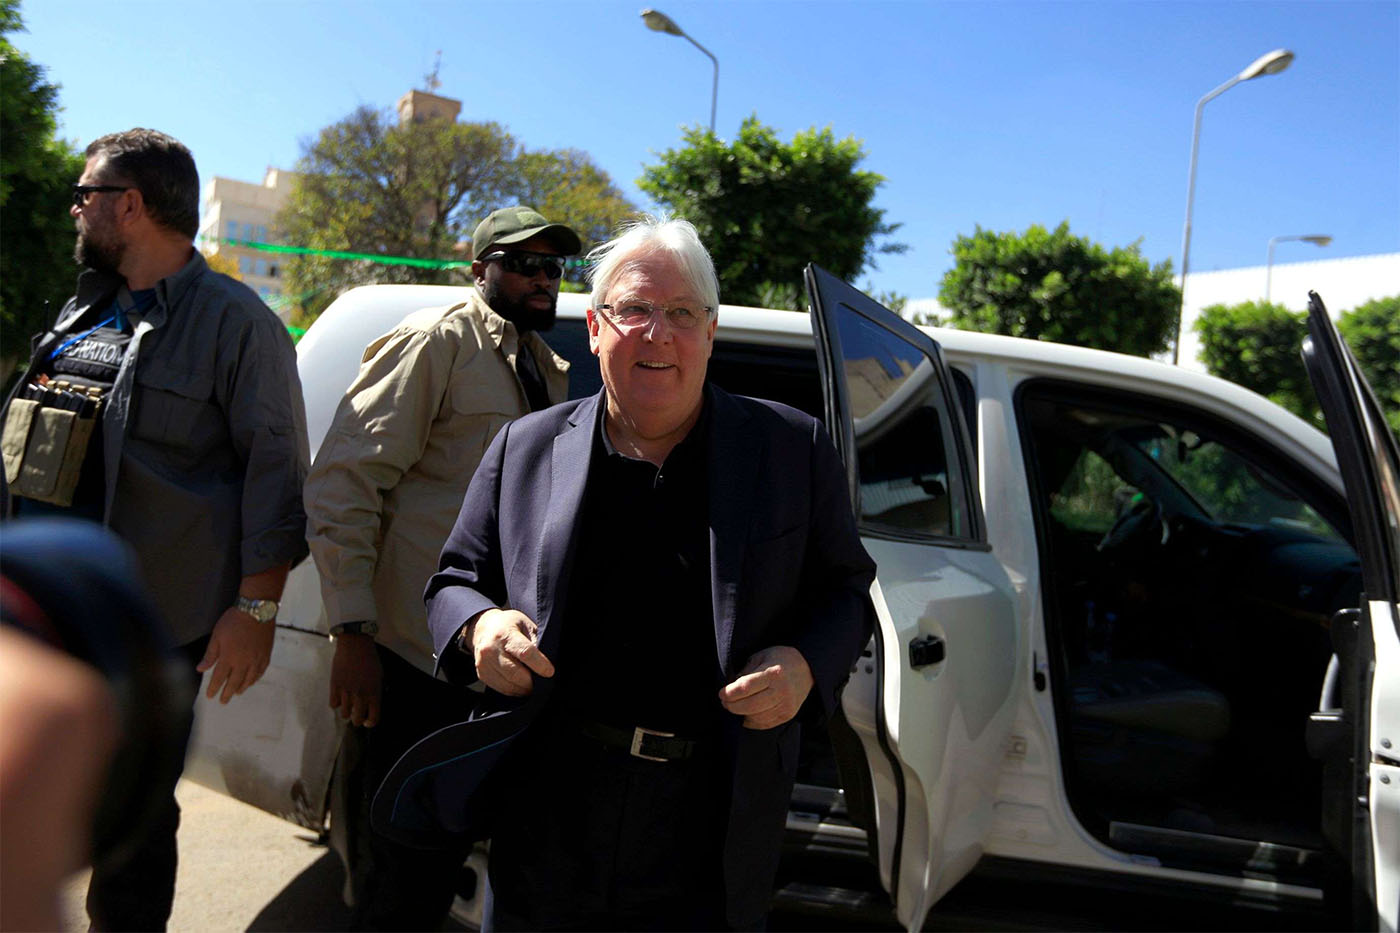 UN envoy Martin Griffiths flew with Huthi rebels to allay their concerns